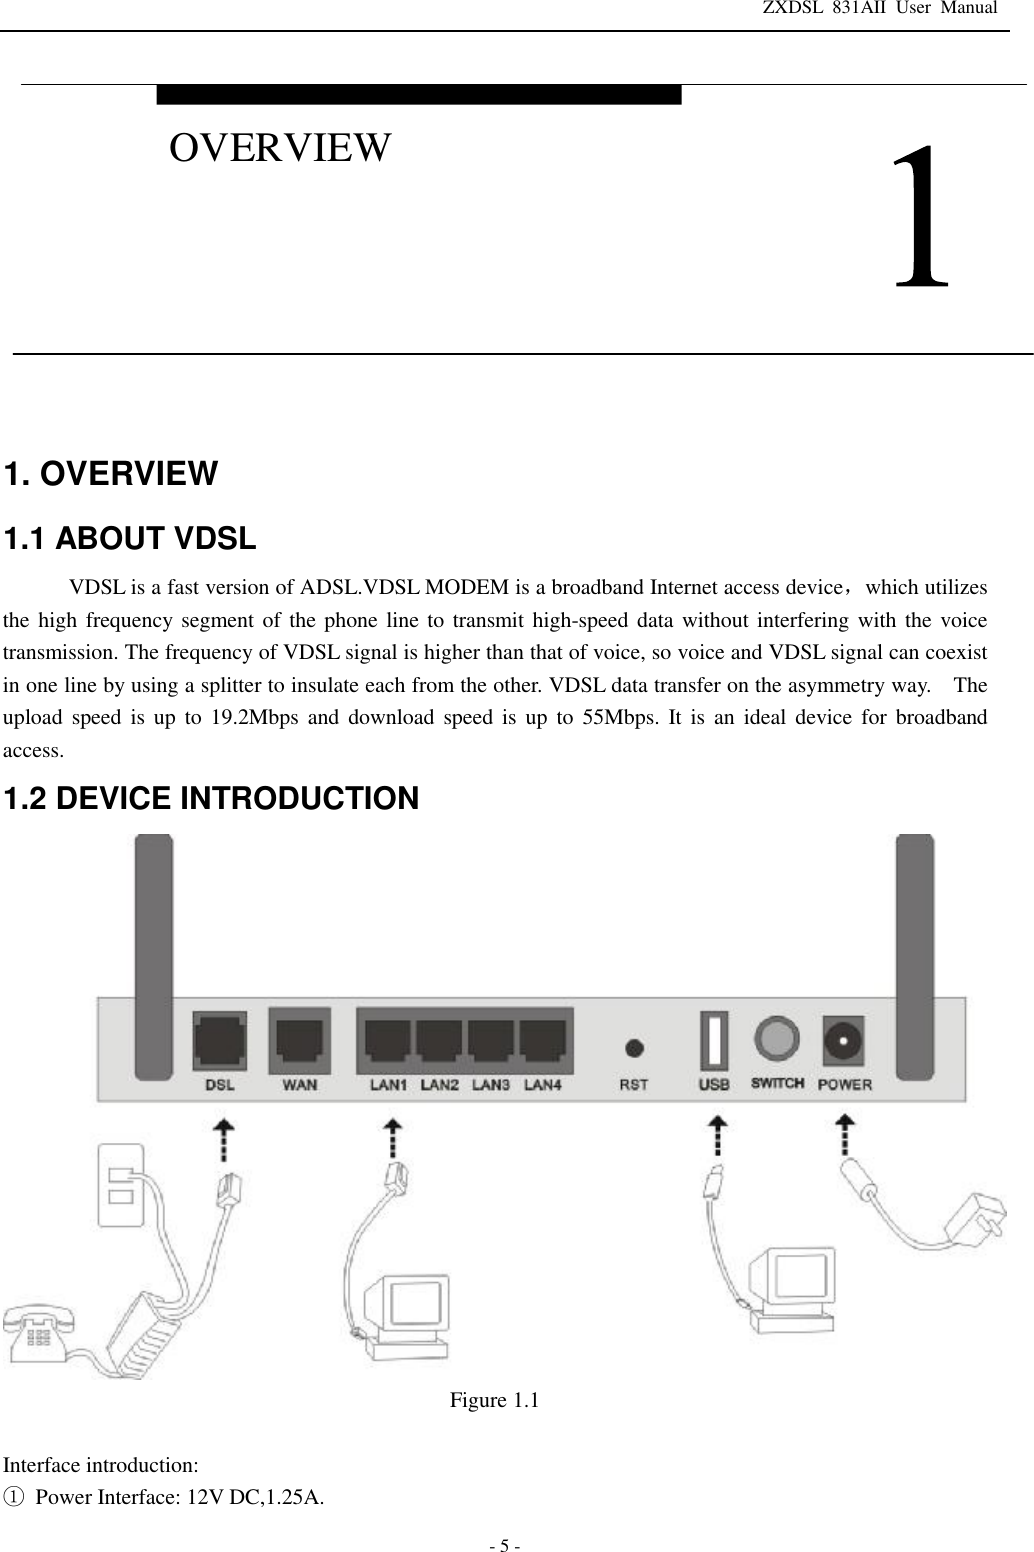 ZXDSL 831AII User Manual  - 5 -  1. OVERVIEW 1.1 ABOUT VDSL VDSL is a fast version of ADSL.VDSL MODEM is a broadband Internet access device，which utilizes the high frequency segment of the phone line to transmit high-speed data without interfering with the voice transmission. The frequency of VDSL signal is higher than that of voice, so voice and VDSL signal can coexist in one line by using a splitter to insulate each from the other. VDSL data transfer on the asymmetry way.  The upload speed is up to 19.2Mbps and download speed is up to 55Mbps. It is an ideal device for broadband access. 1.2 DEVICE INTRODUCTION  Figure 1.1  Interface introduction: ① Power Interface: 12V DC,1.25A.   OVERVIEW 